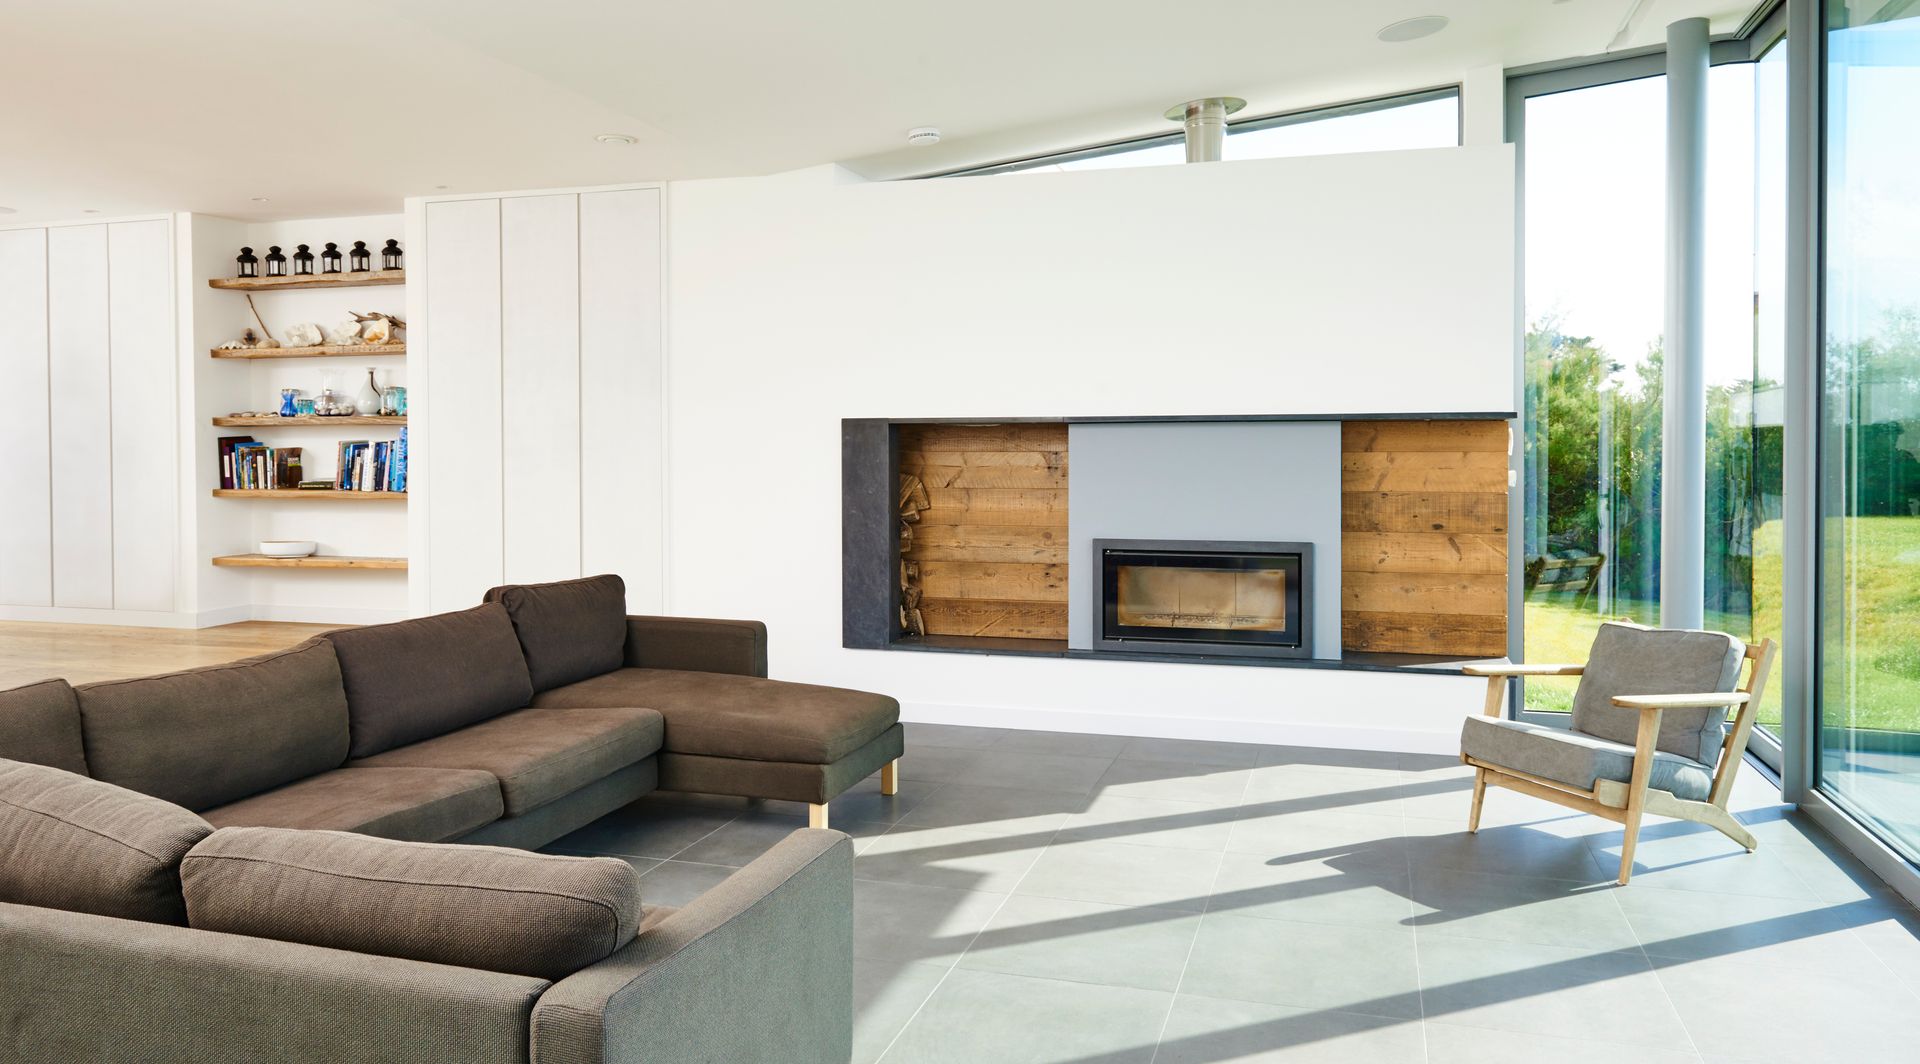 Sandhills Living Room and Fireplace Barc Architects Living room